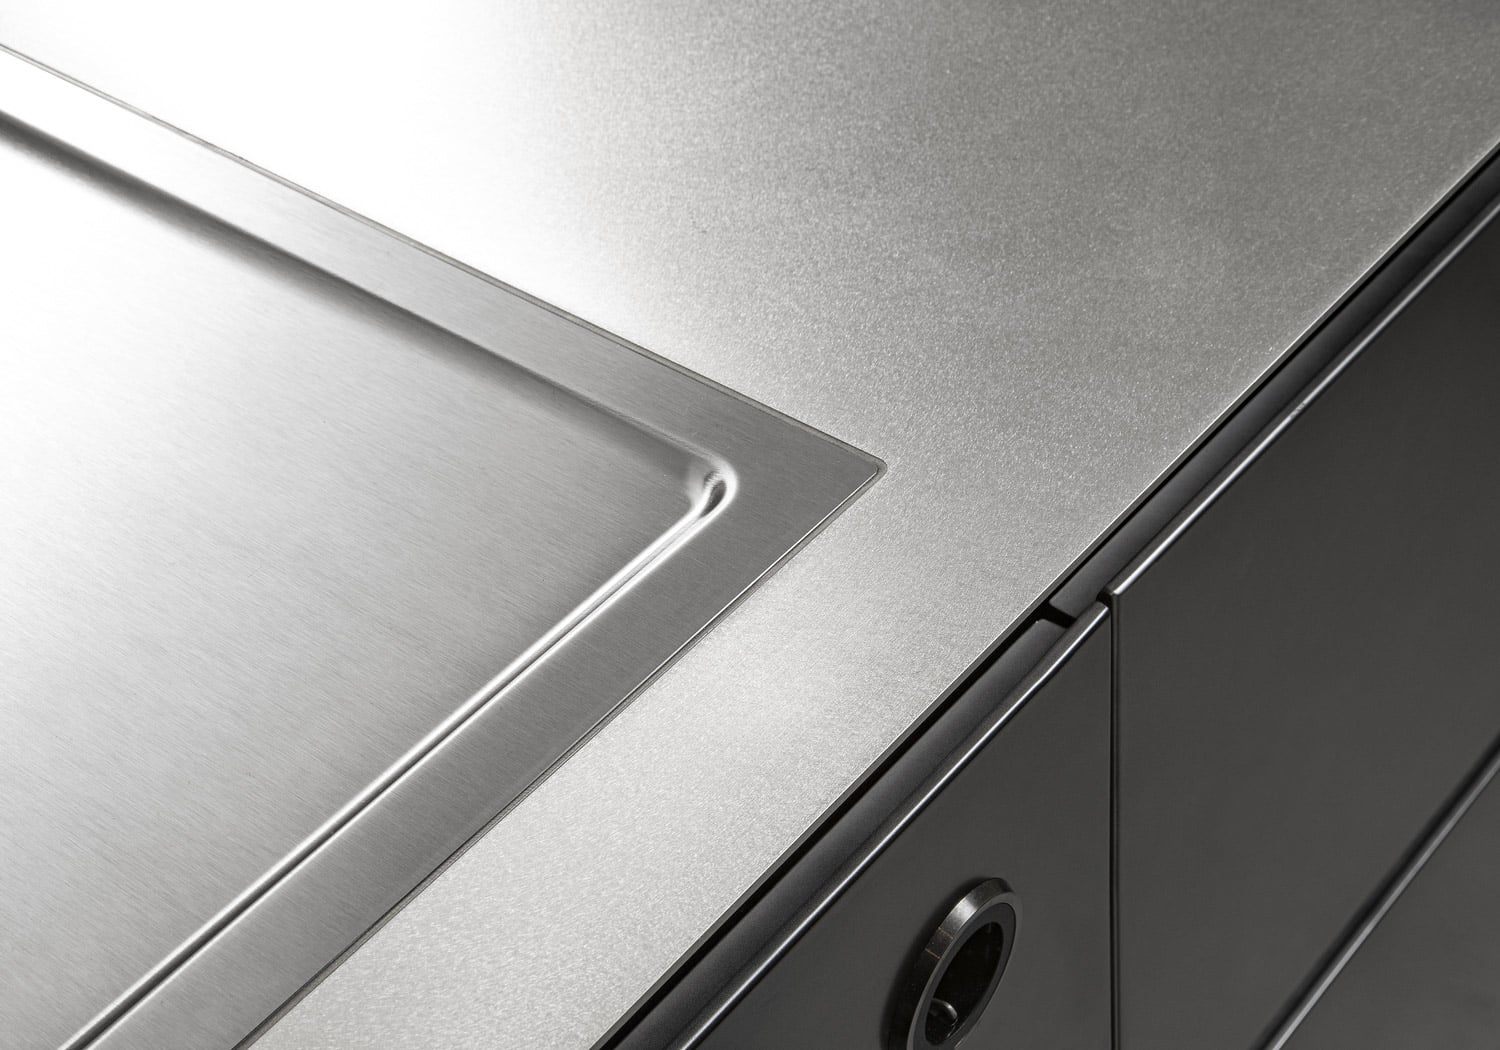 Every detail was chosen to provide a fully minimalist look, from the extra thin countertop to the Step cabinet handle with integrated channel in matching finishes.